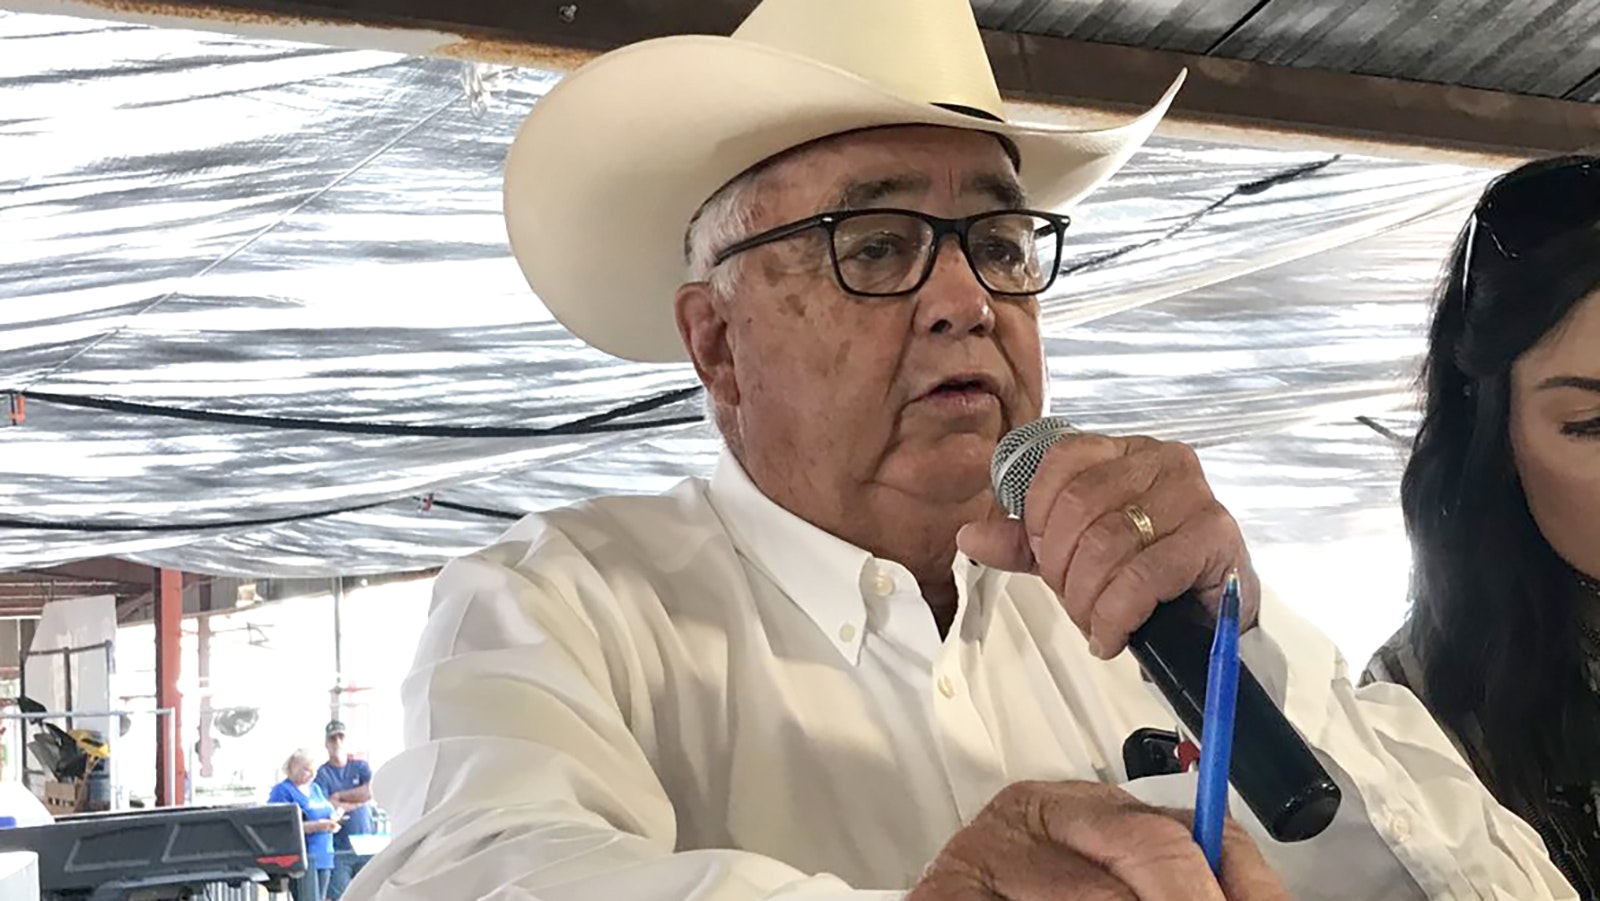 Auctioneer Warren Thompson has fast-talked his way through 50 years of Fremont County Fair auctions, helping raise $20 million over the years.